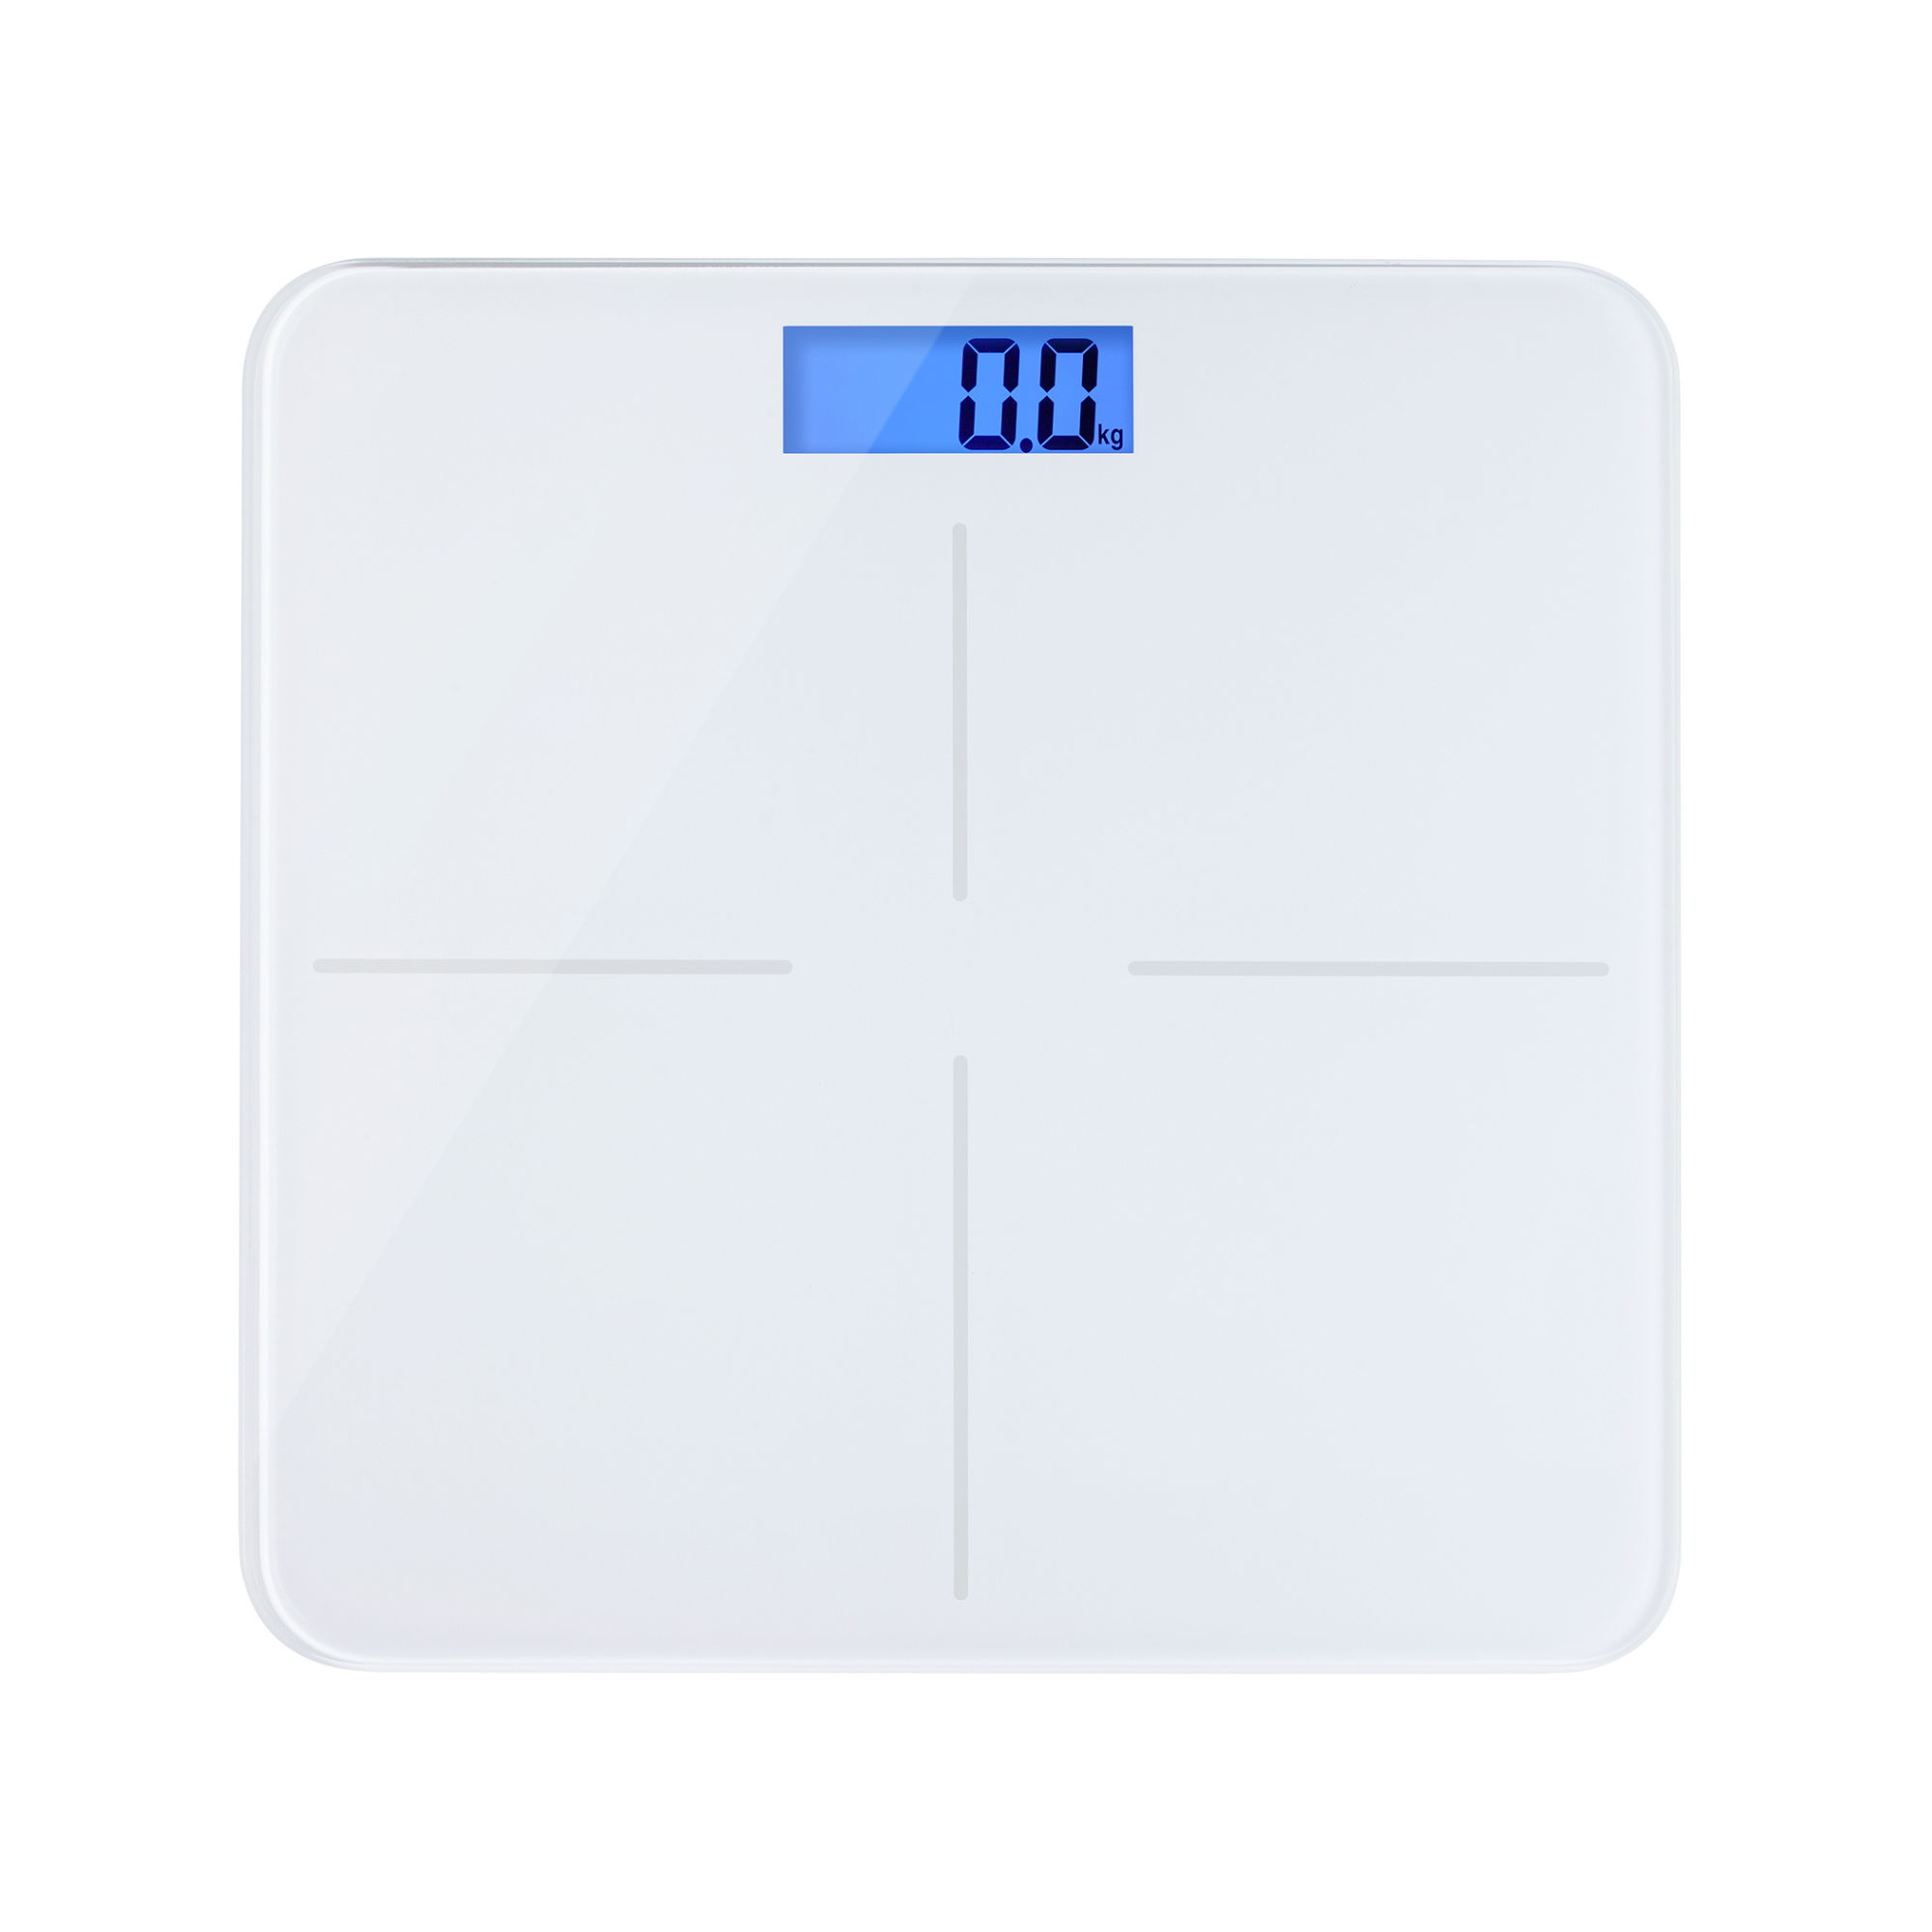 Smart Body Weight Scales - With Bluetooth App – RENPHO US